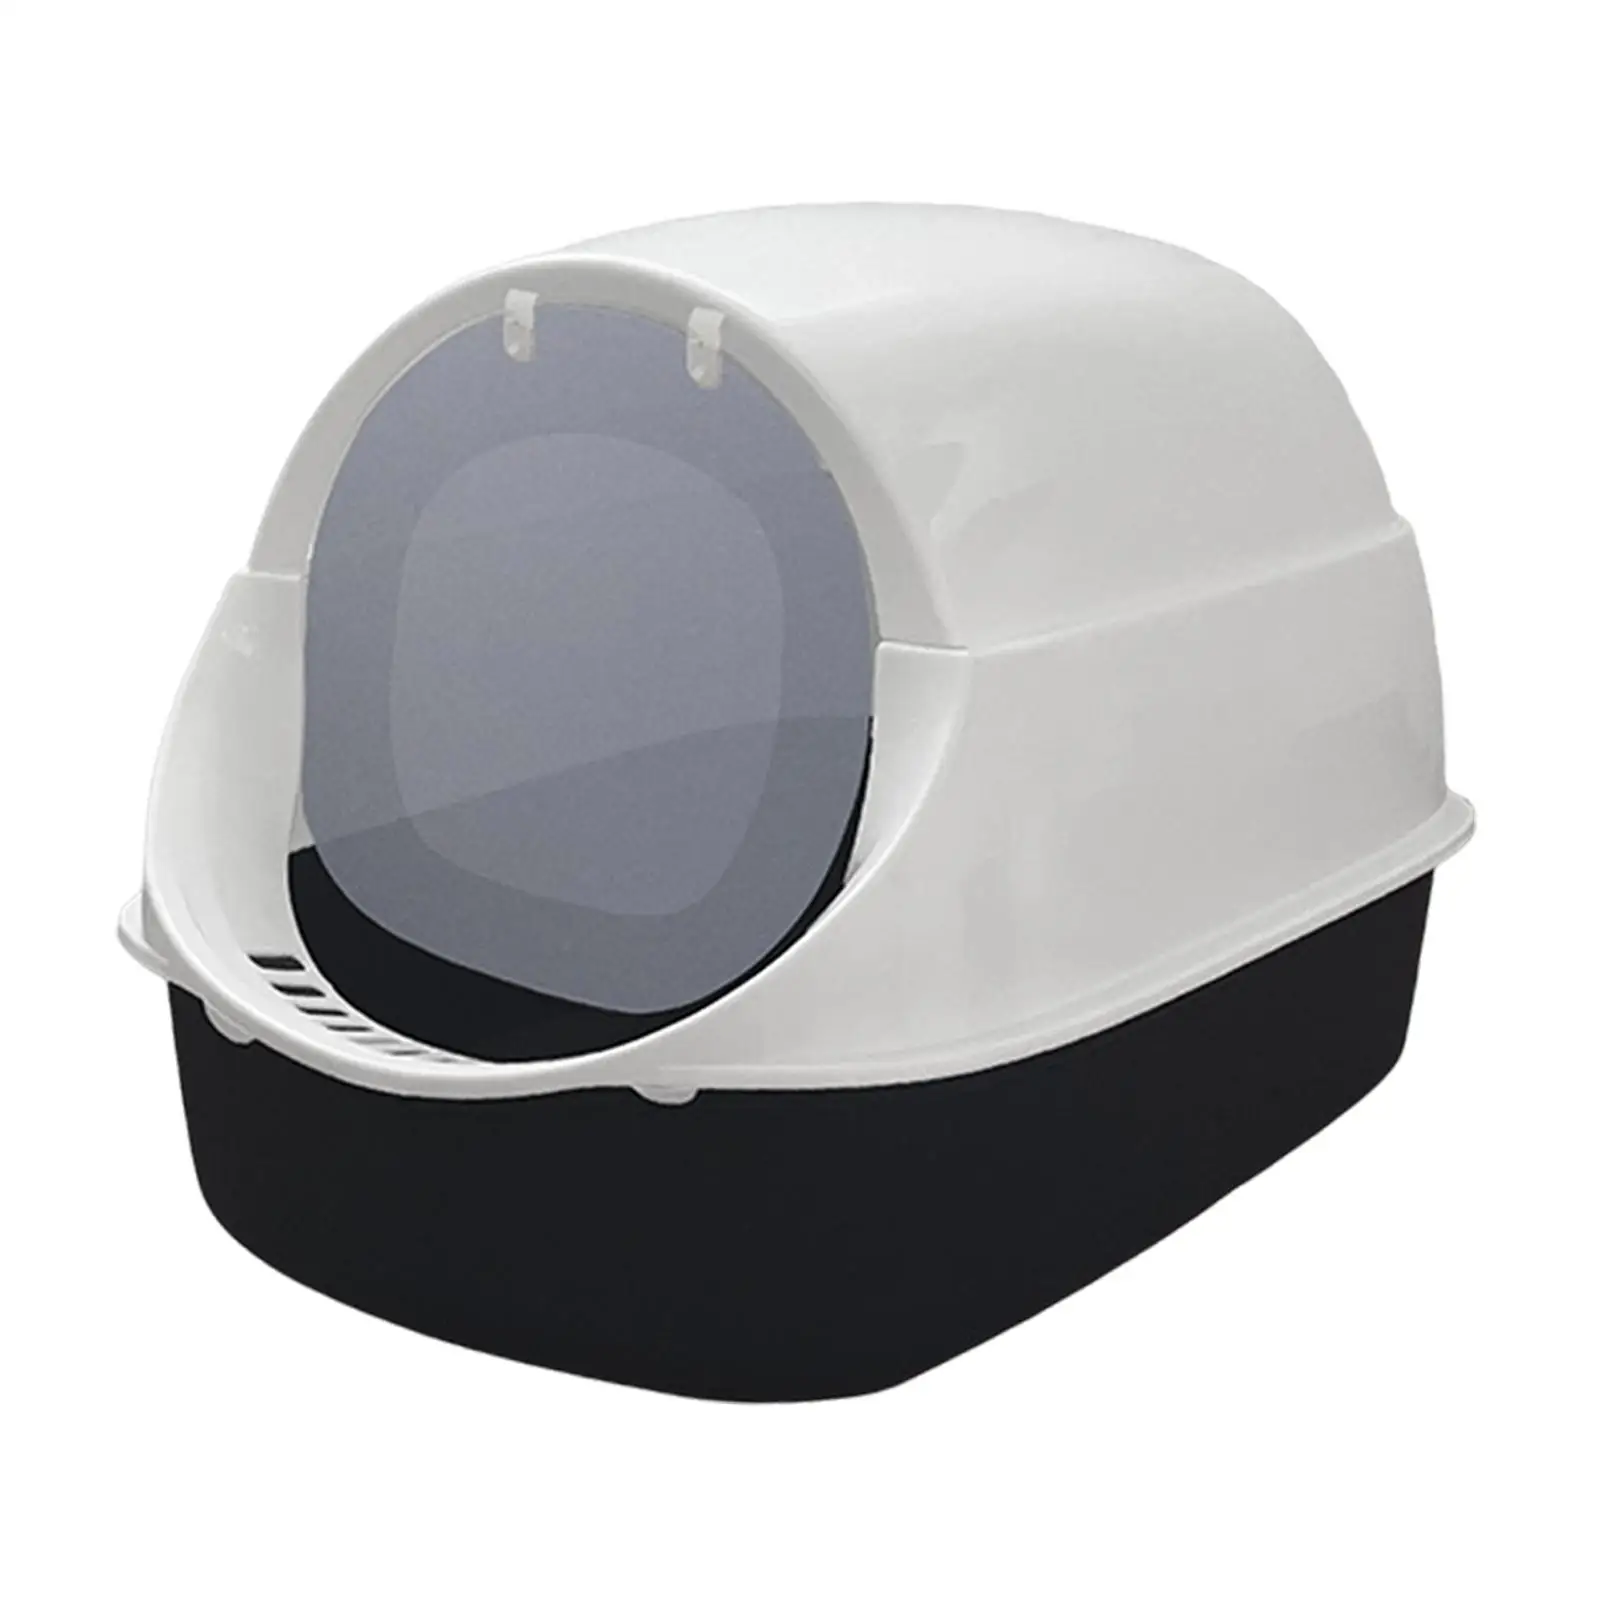 Hooded Cat Litter Box with Door with Scatter Shield Splash Proof with Lid for Indoor Easy to Clean Cat Litter Tray Kitten Toilet